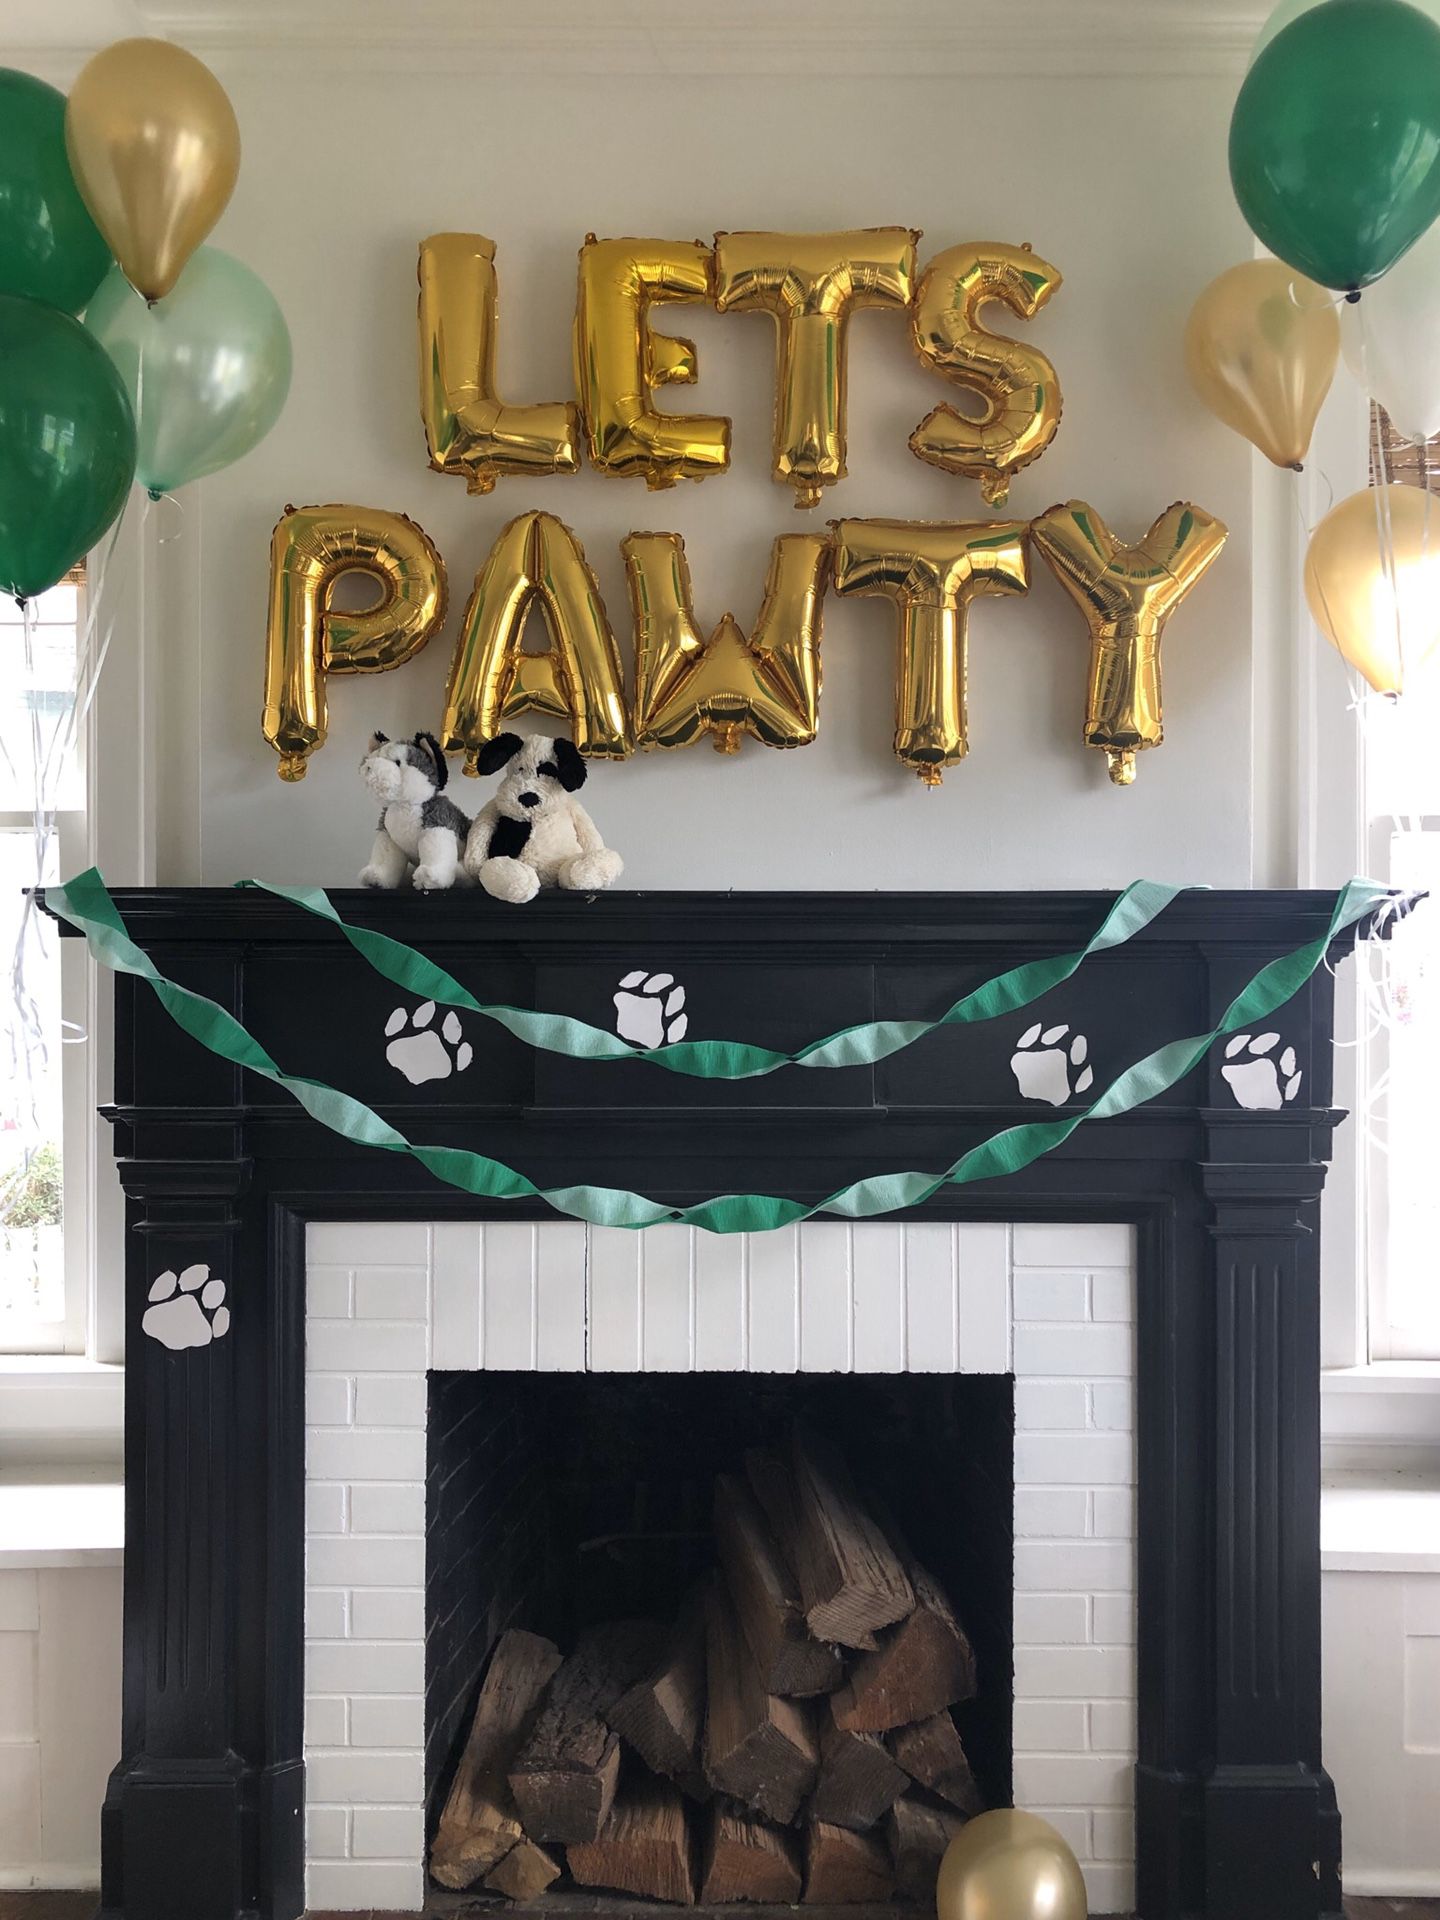 “LETS PAWTY” party balloons